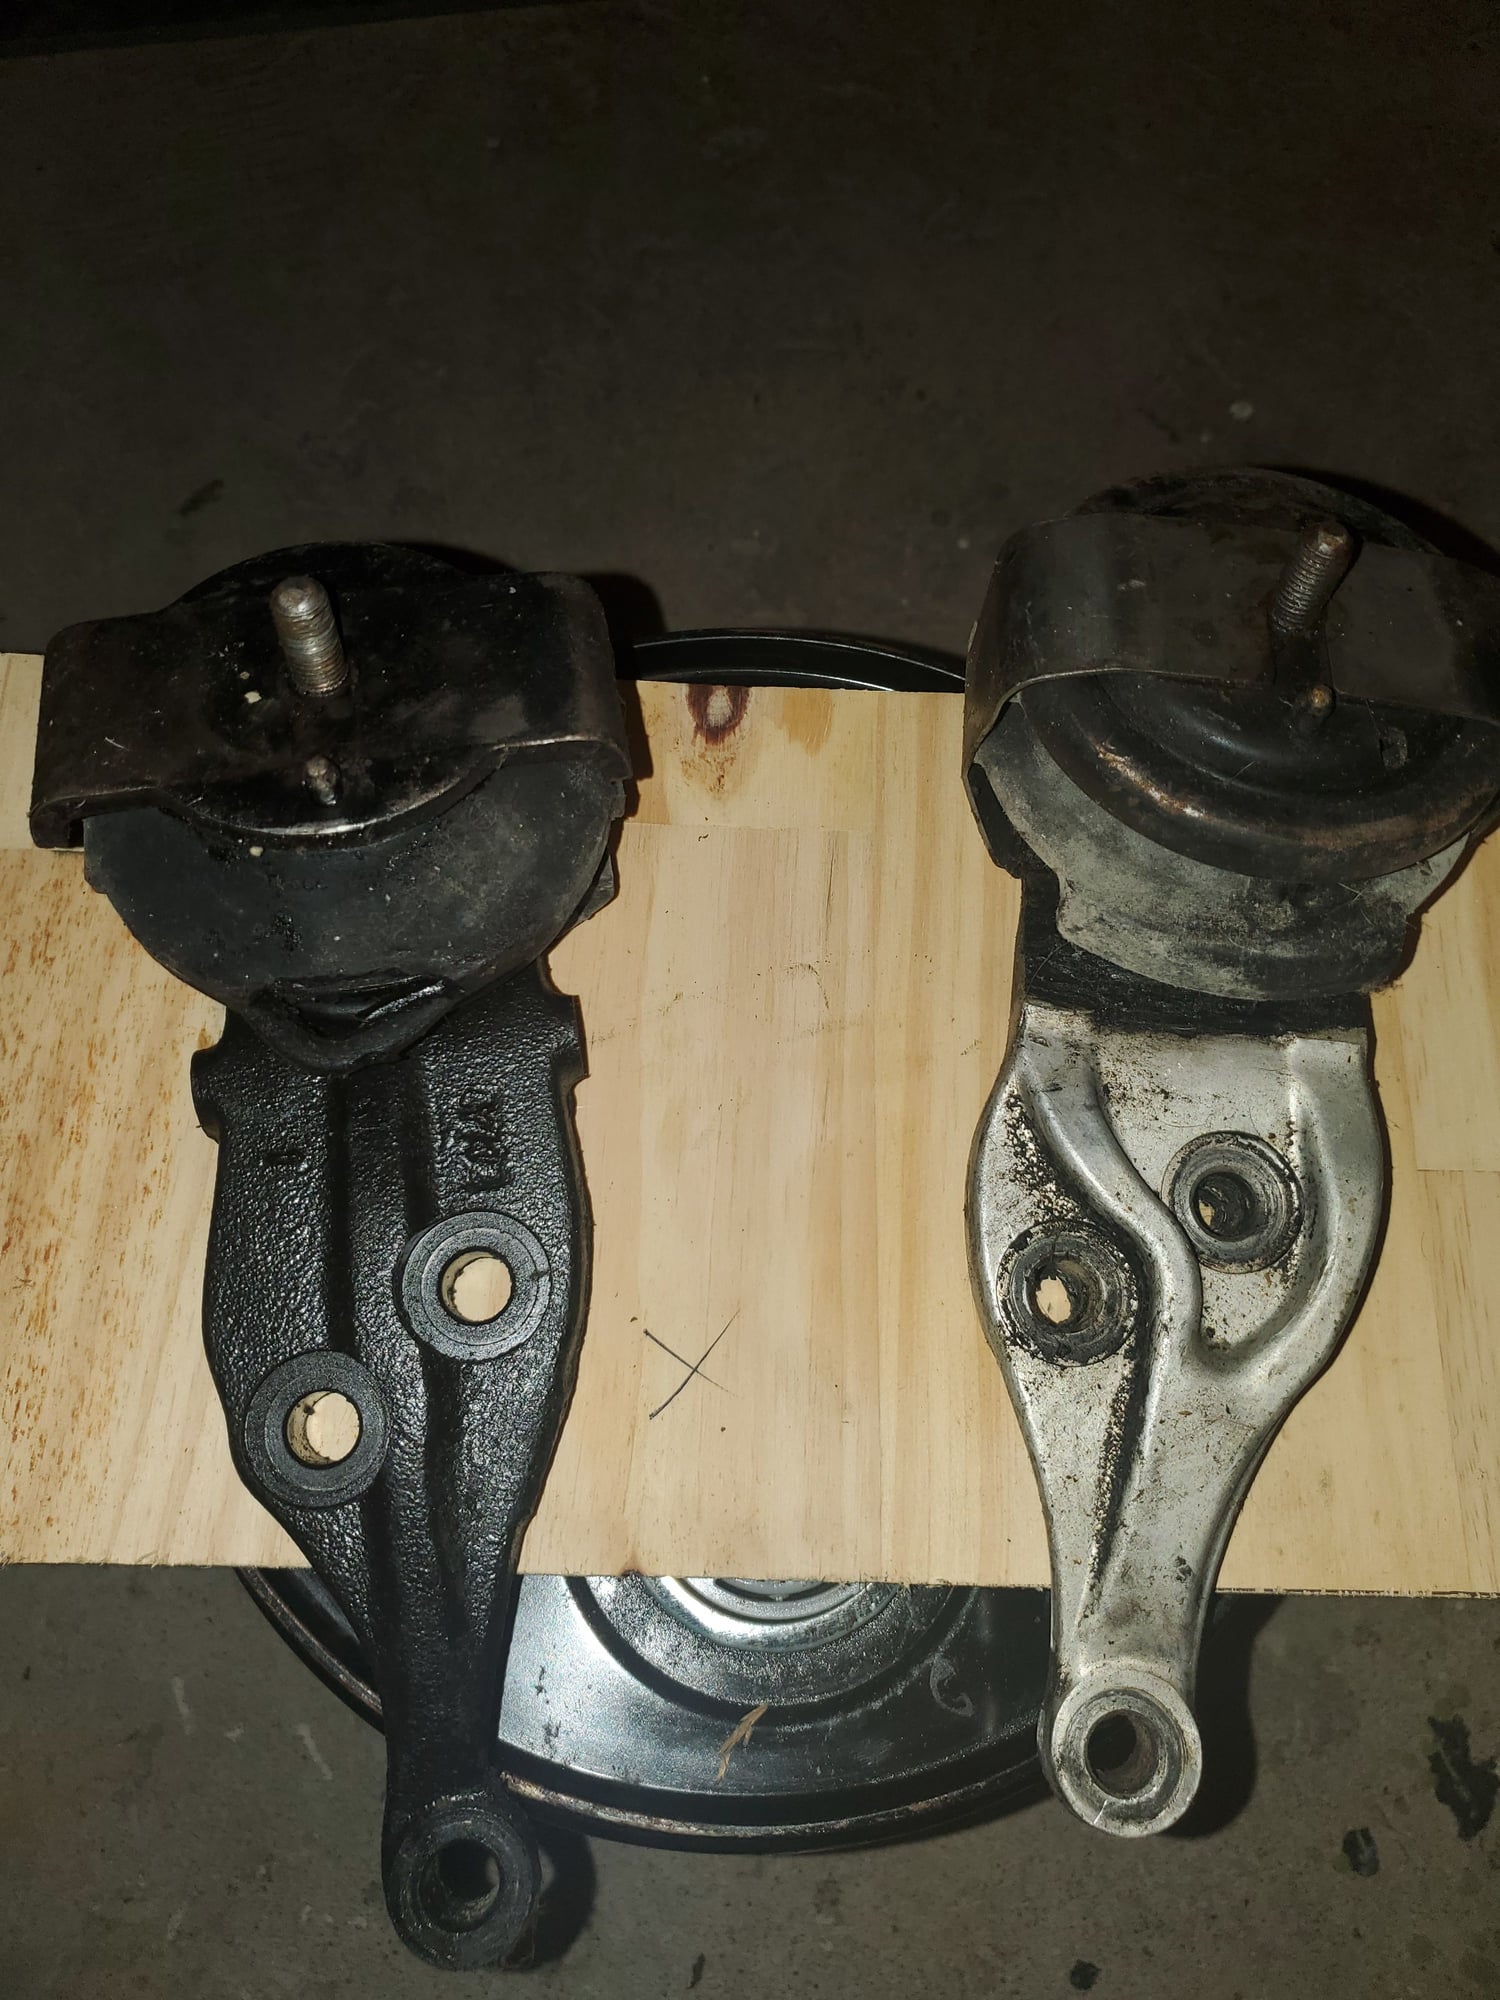 Steering/Suspension - FD Mounts - Used - 1992 to 1999 Mazda RX-7 - Newburgh, NY 12550, United States